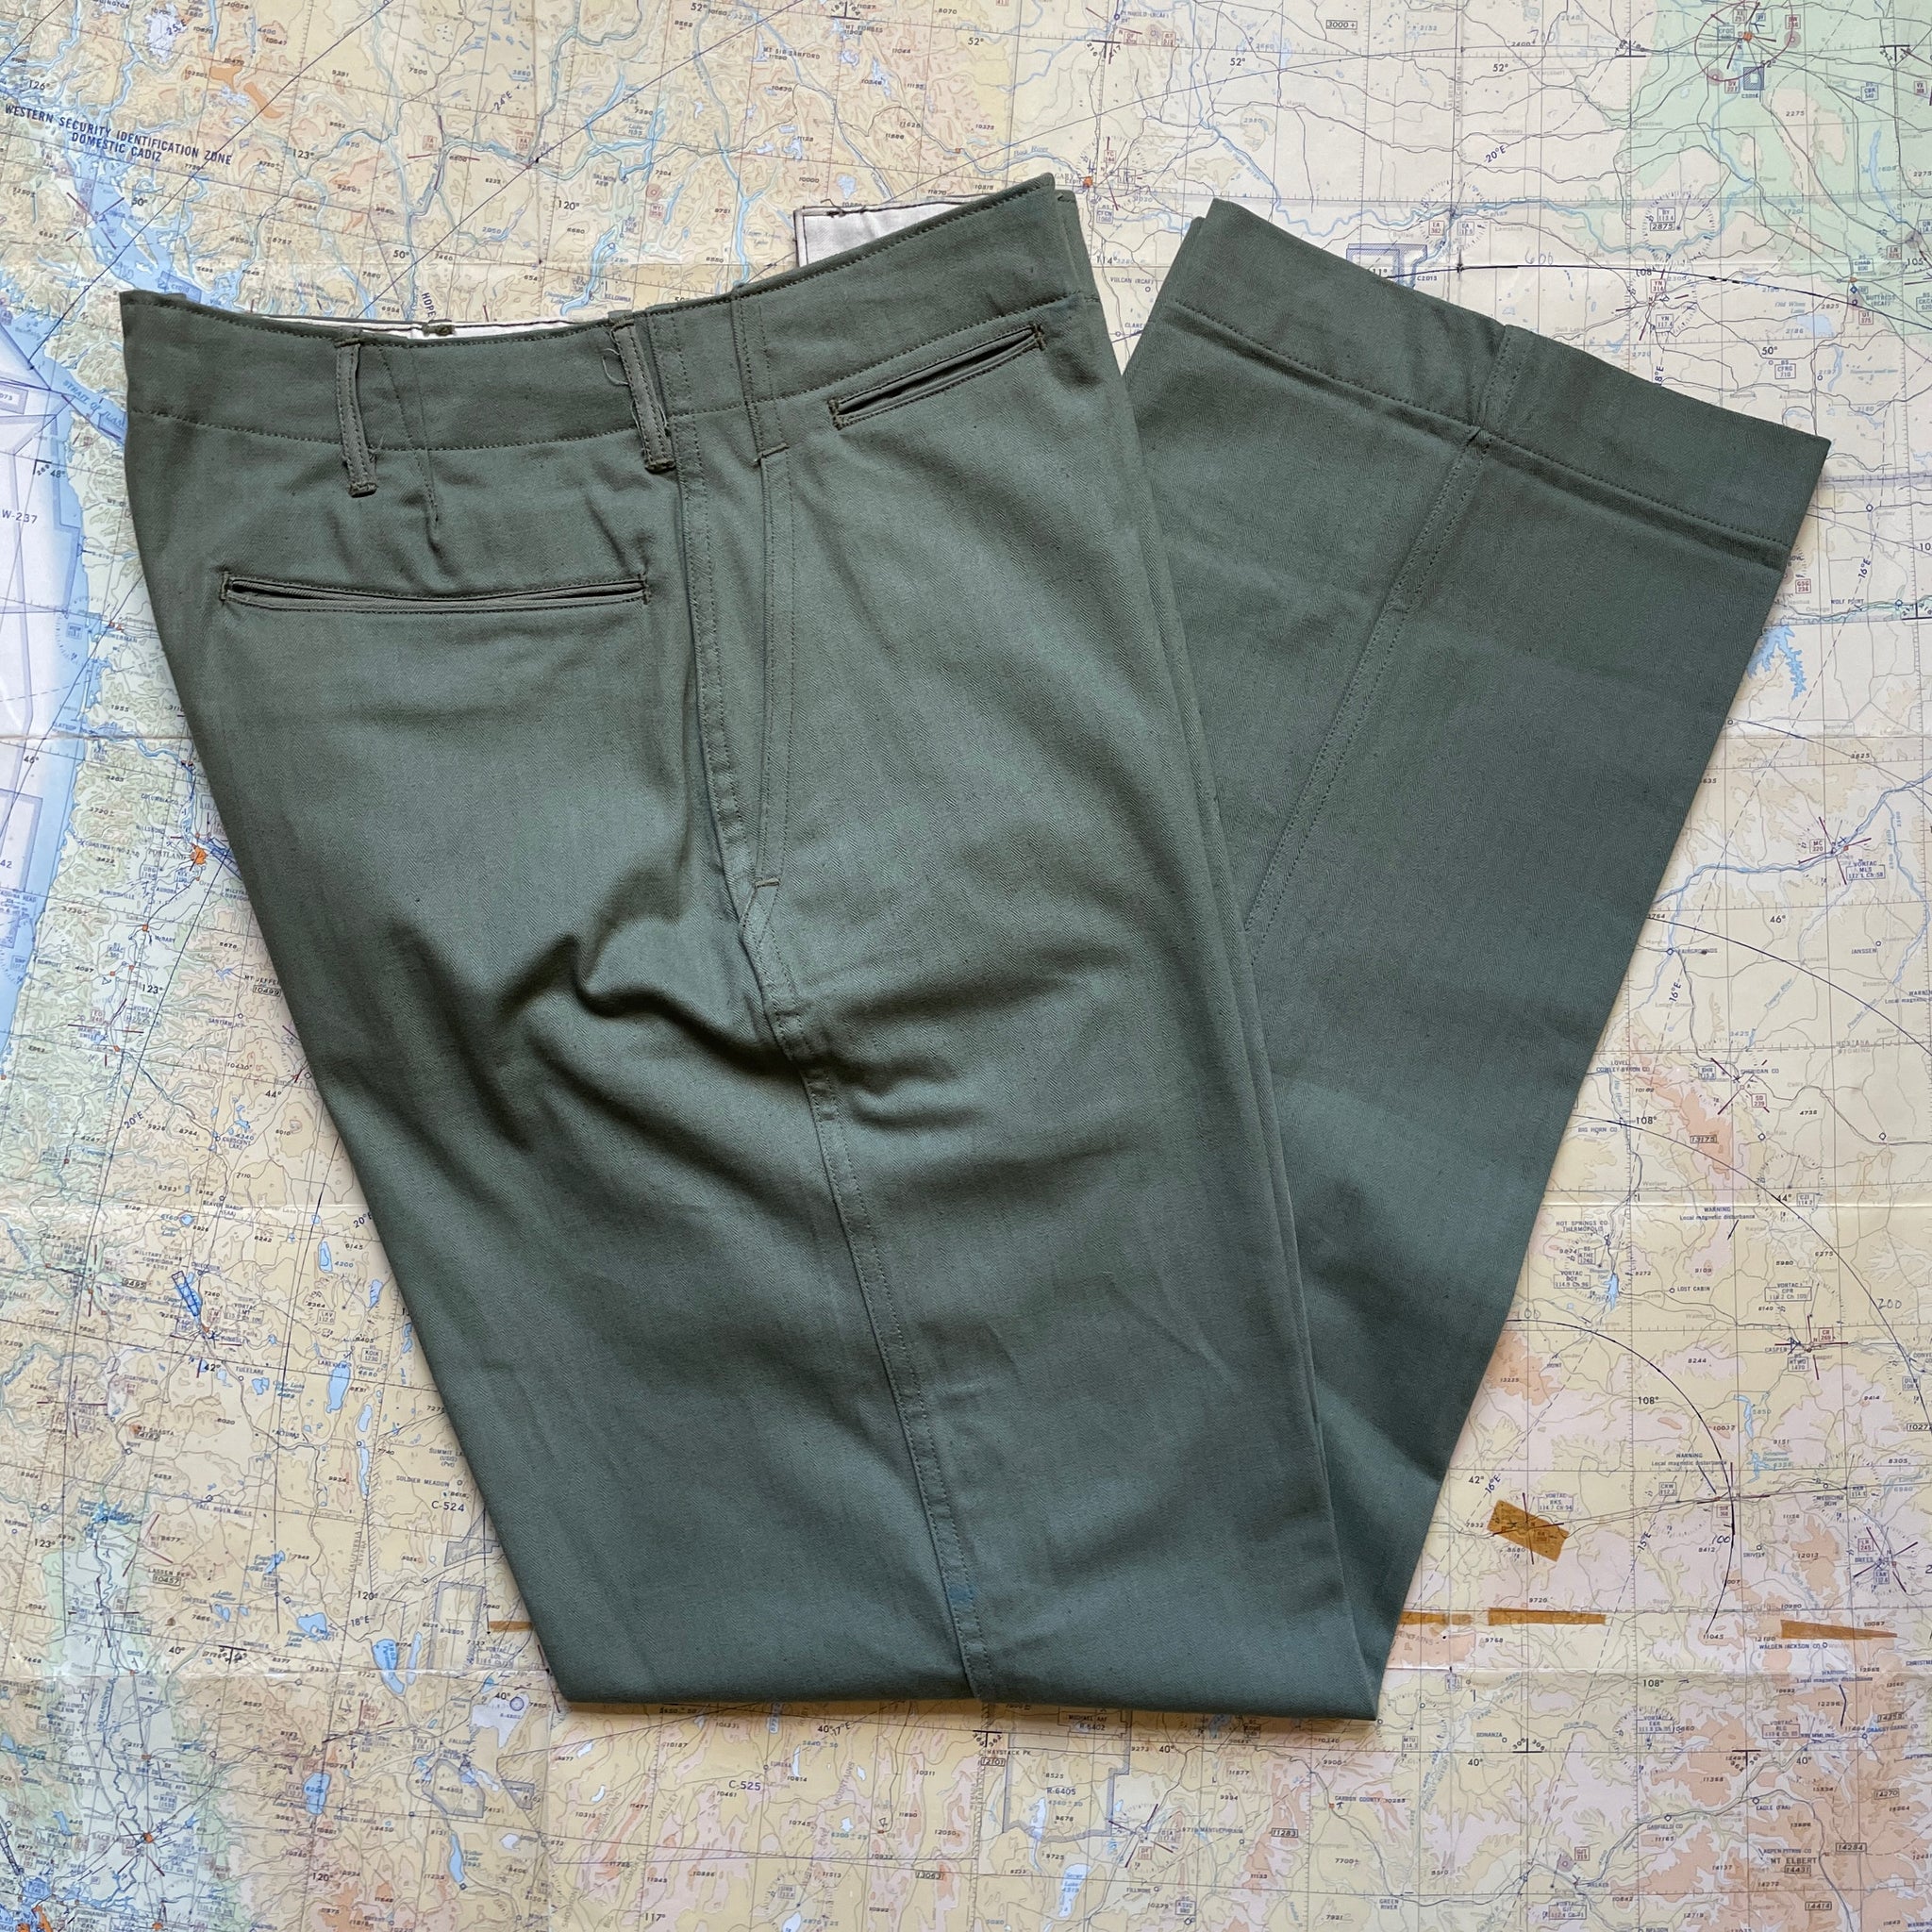 Deadstock US Army Pre-War HBT Fatigue Shirt & Trousers – The